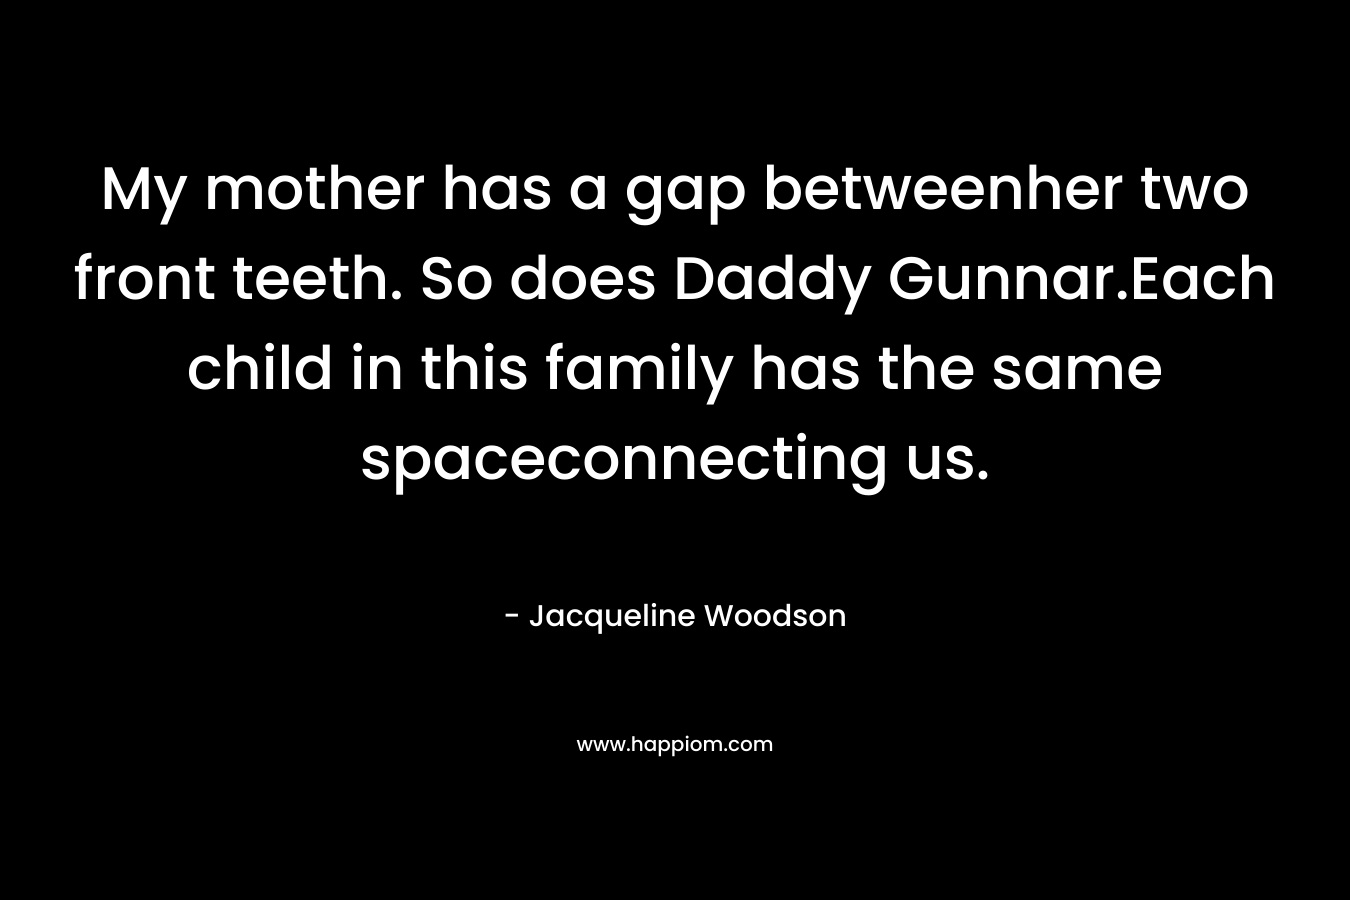 My mother has a gap betweenher two front teeth. So does Daddy Gunnar.Each child in this family has the same spaceconnecting us.